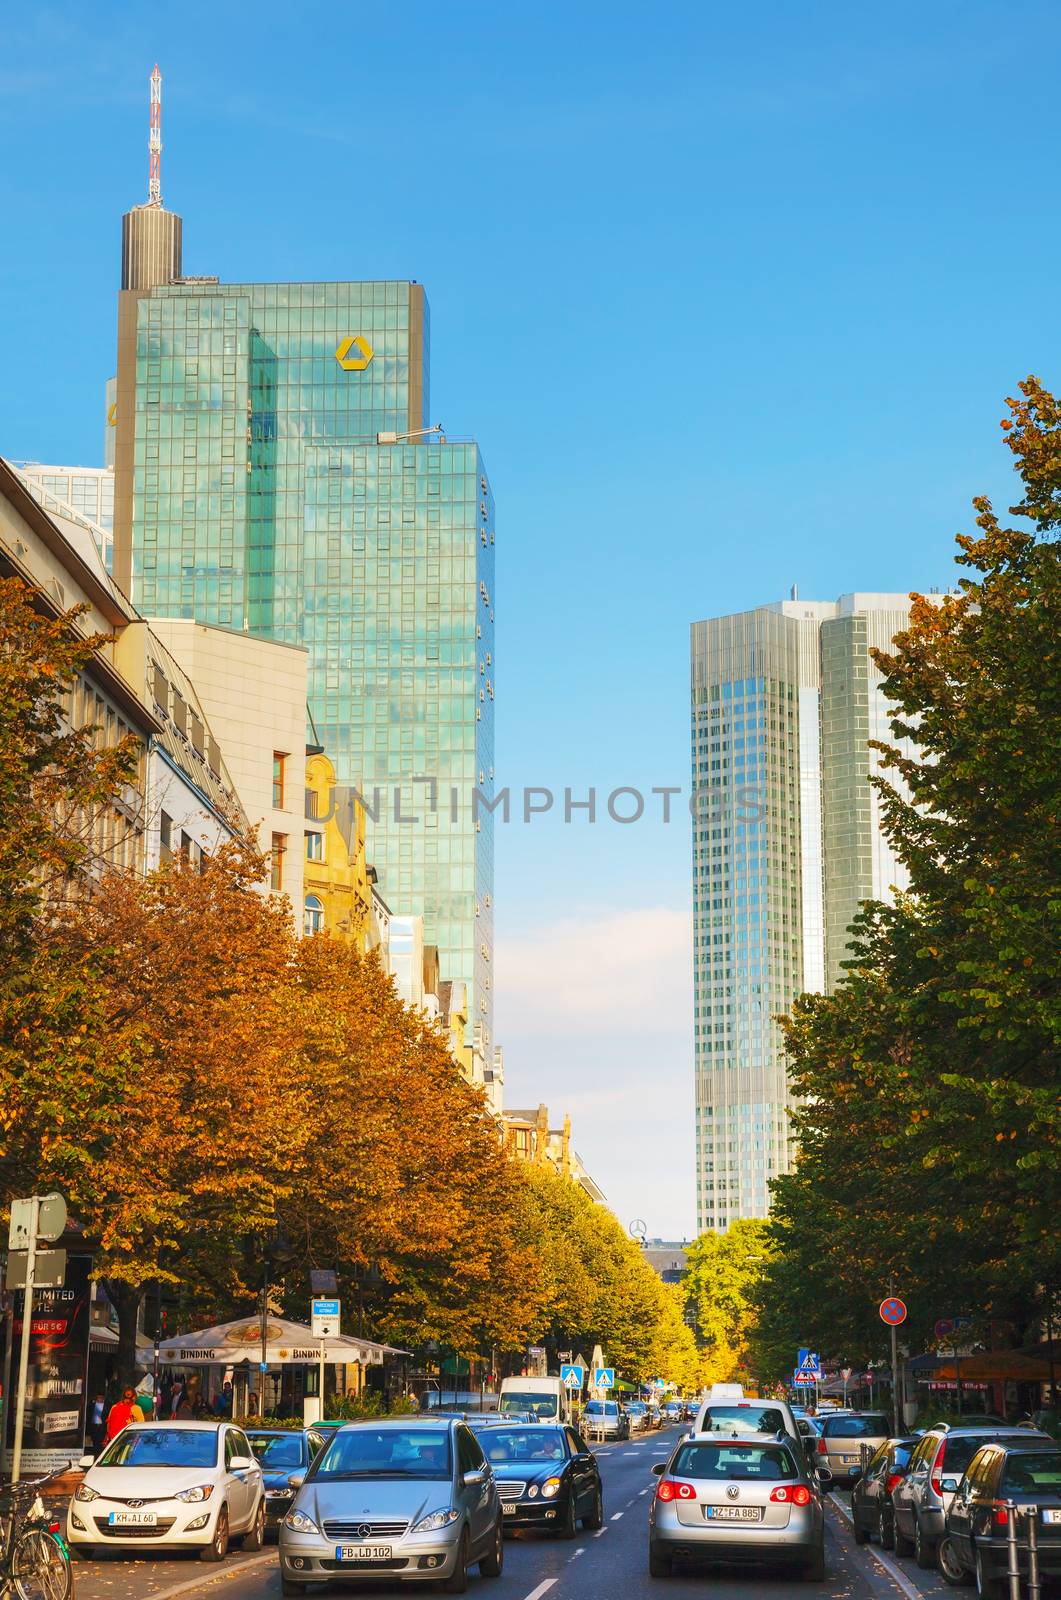 FRANKFURT - OCTOBER 14: Frankfurt am Main street on October 14, 2014 in Frankfurt, Germany. It's the largest city in the German state of Hessen and the fifth-largest city in Germany.